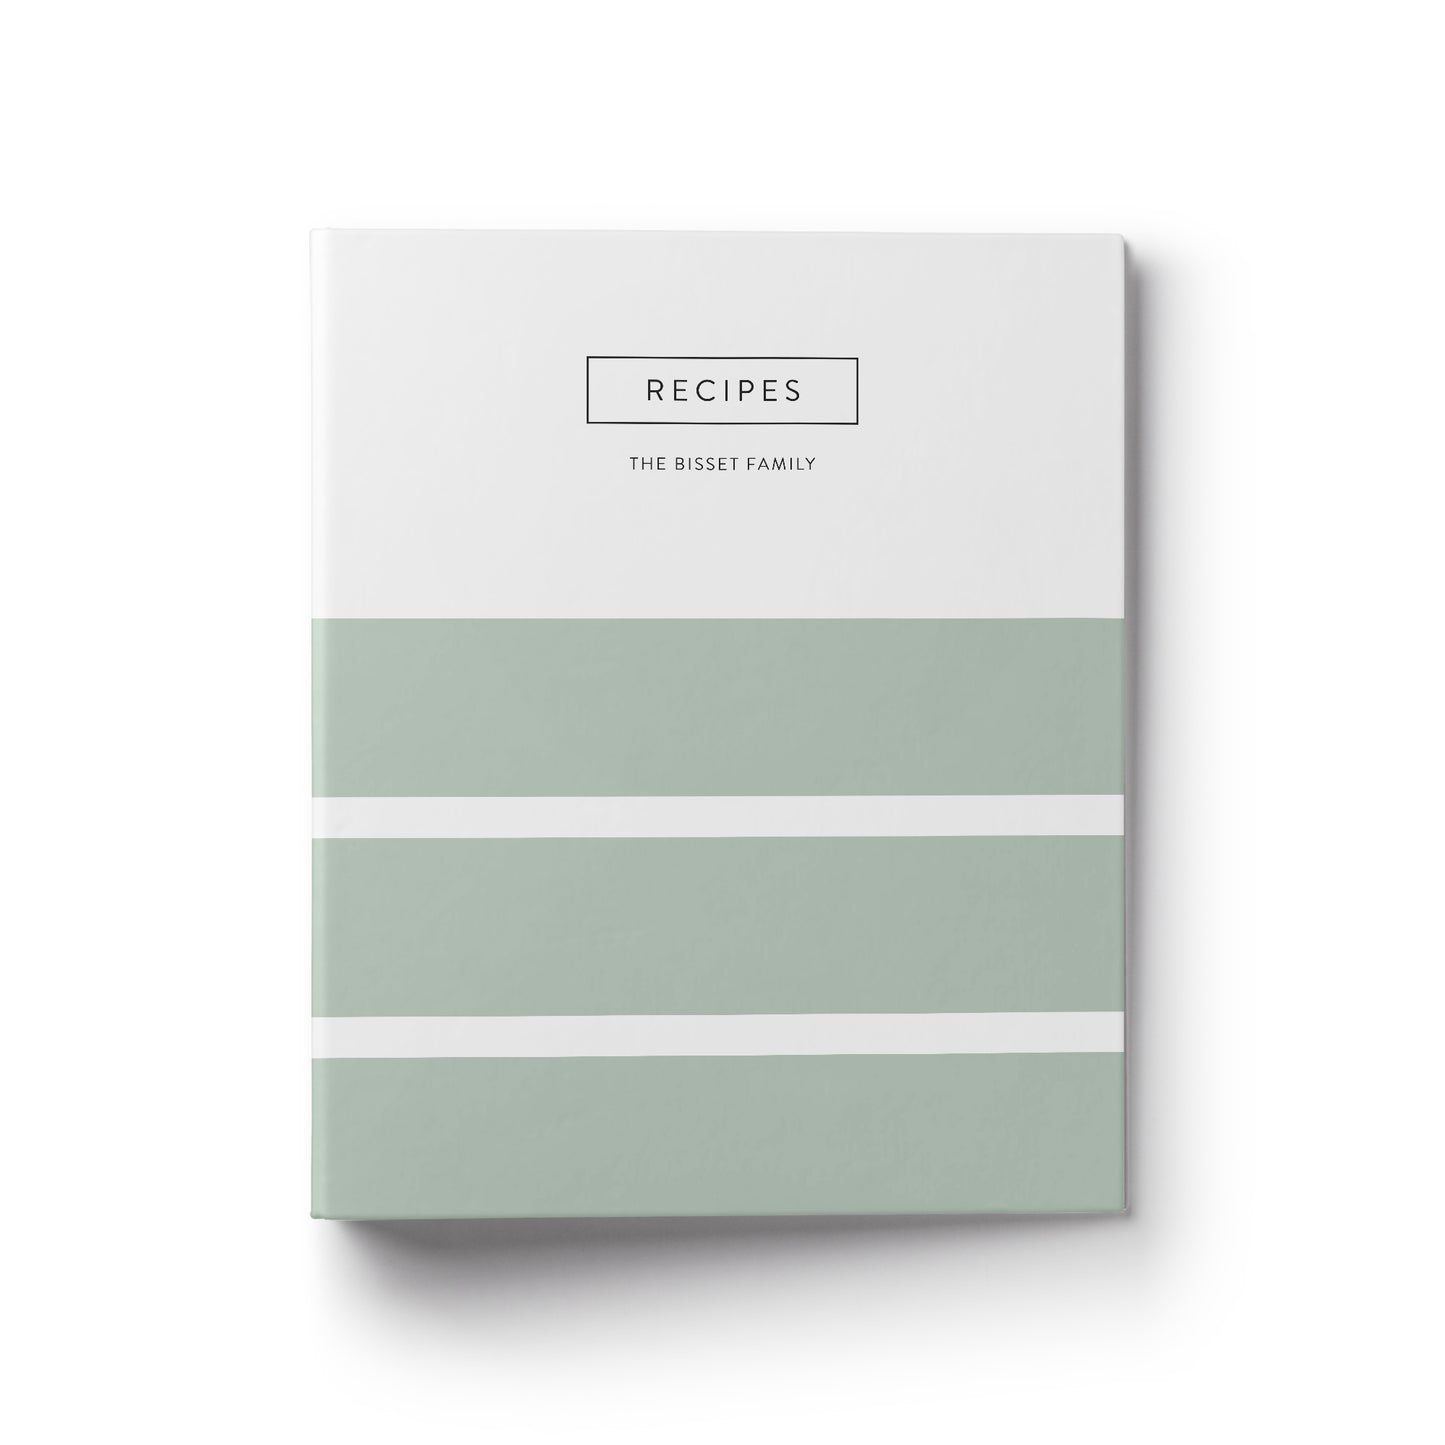 A striped custom recipe binder makes the perfect gift for any occasion